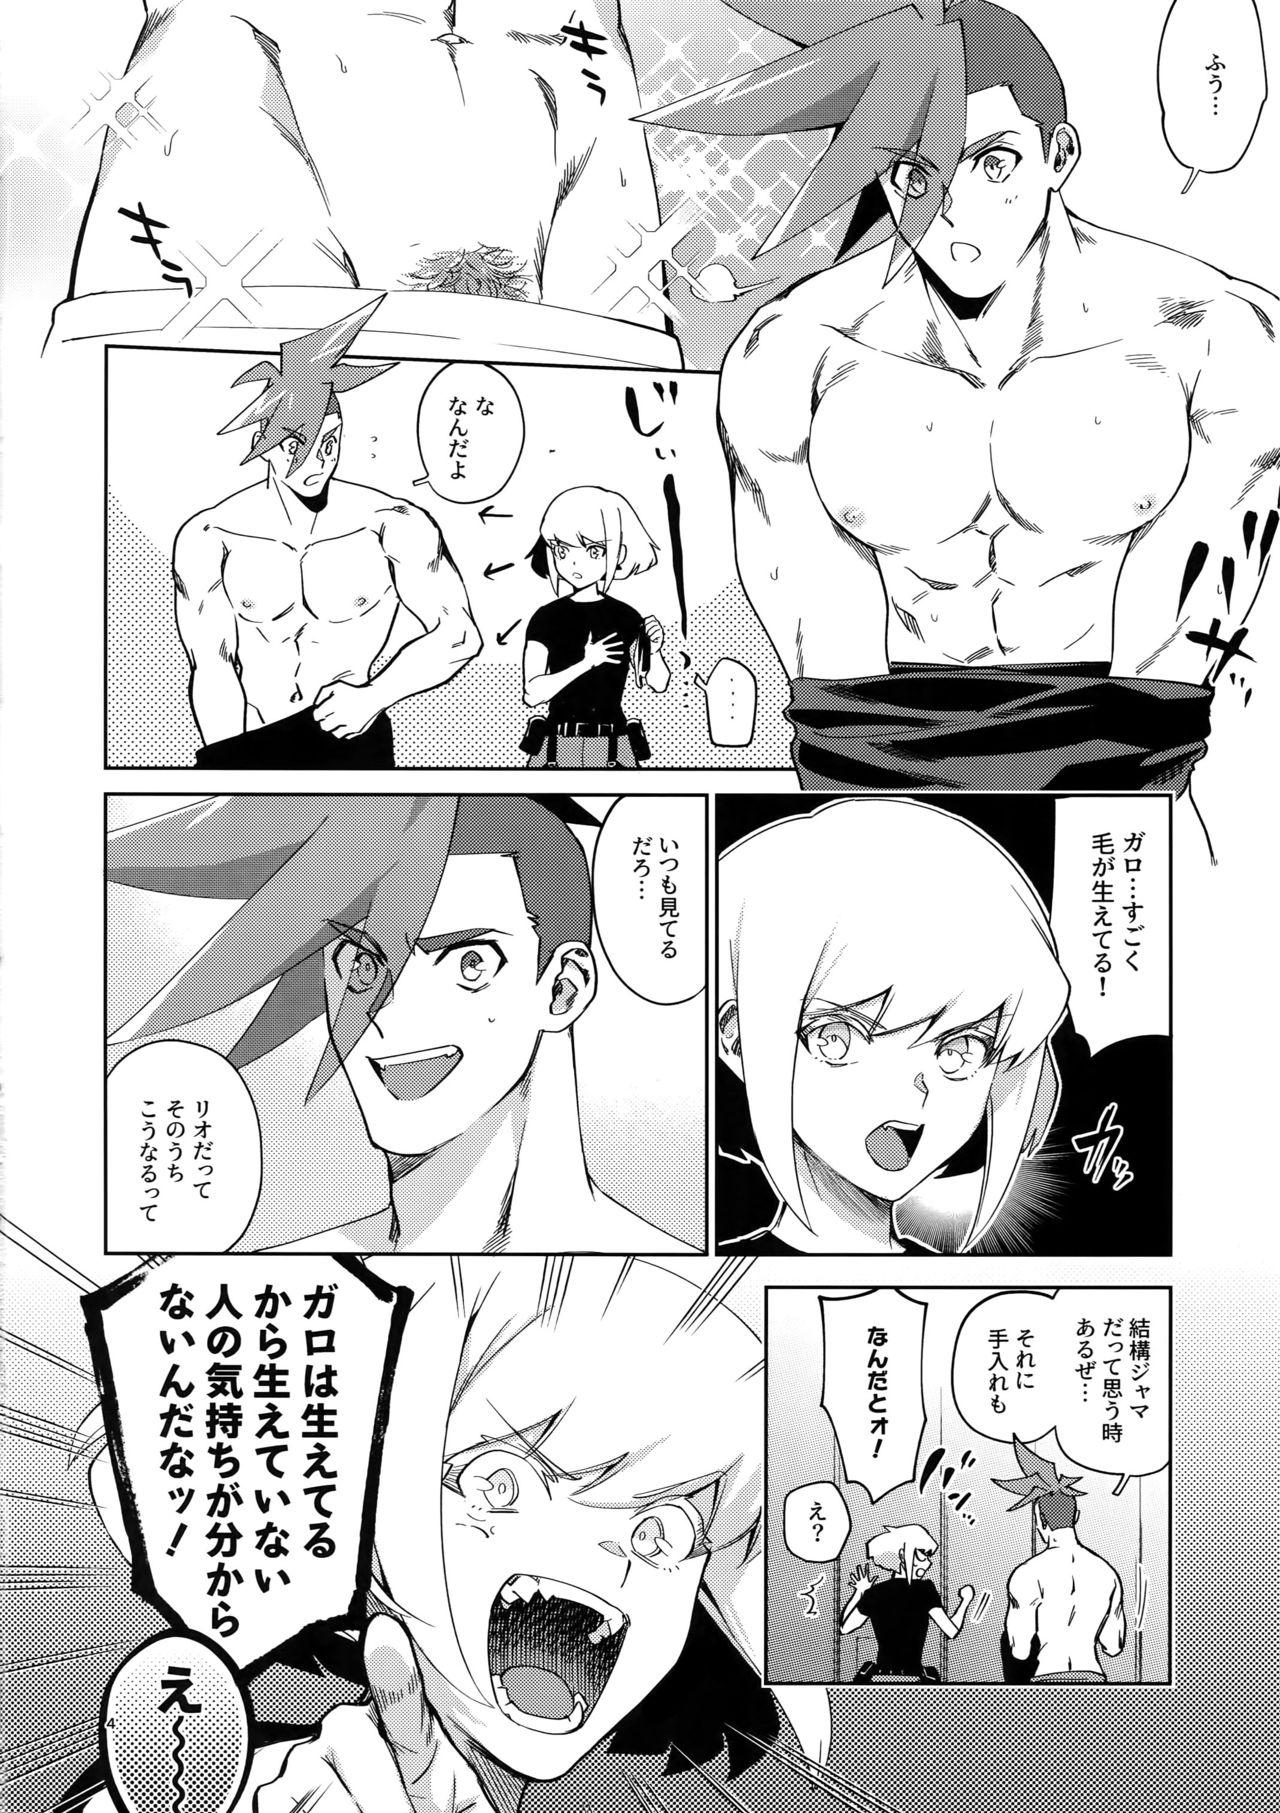 Hot Whores One and Only - Promare Thief - Page 3